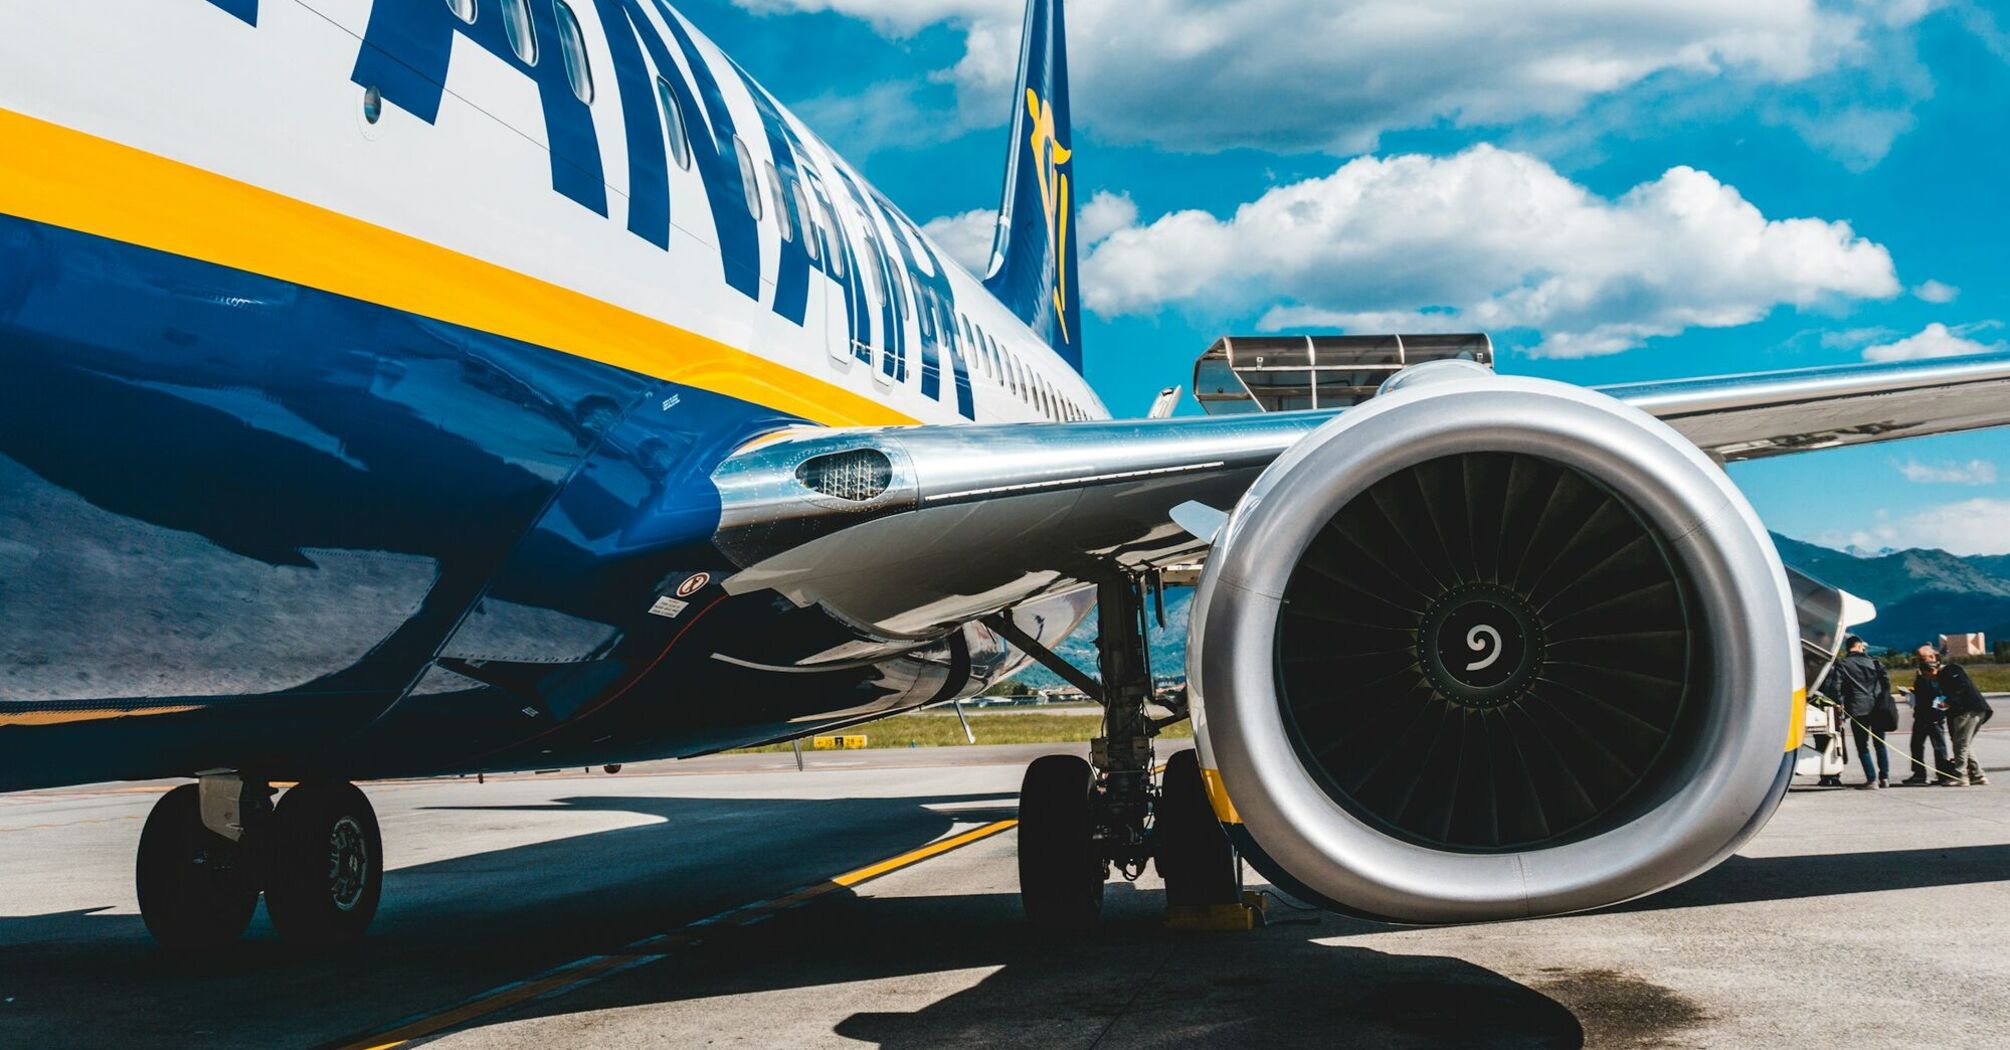 Ryanair aircraft parked on the tarmac with visible engine